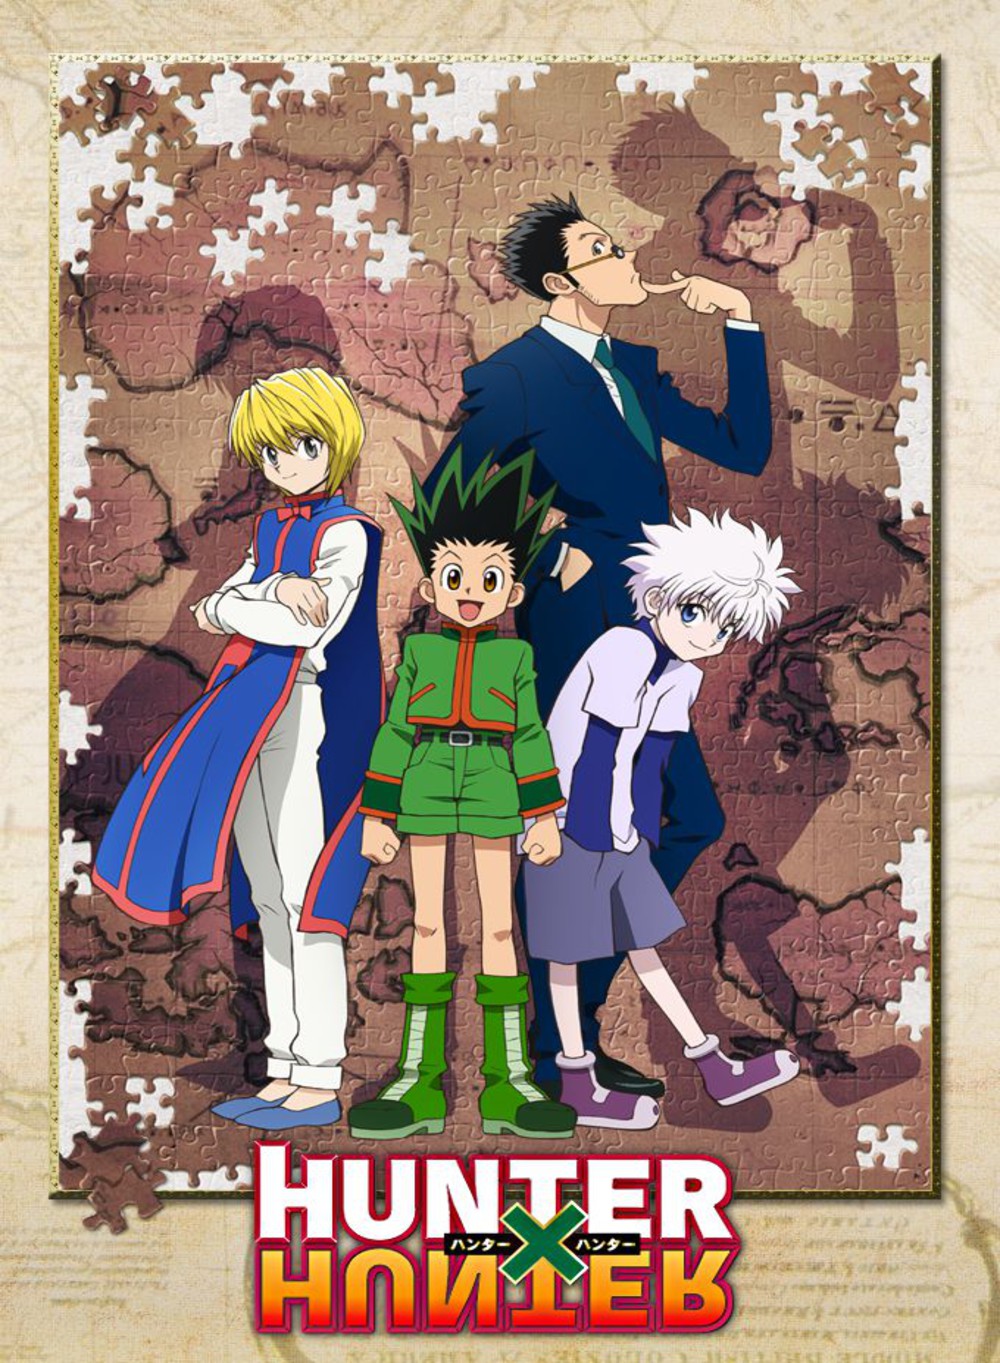 2 Things About The Original Anime Hunter X Hunter Ruined  2 It Fixed